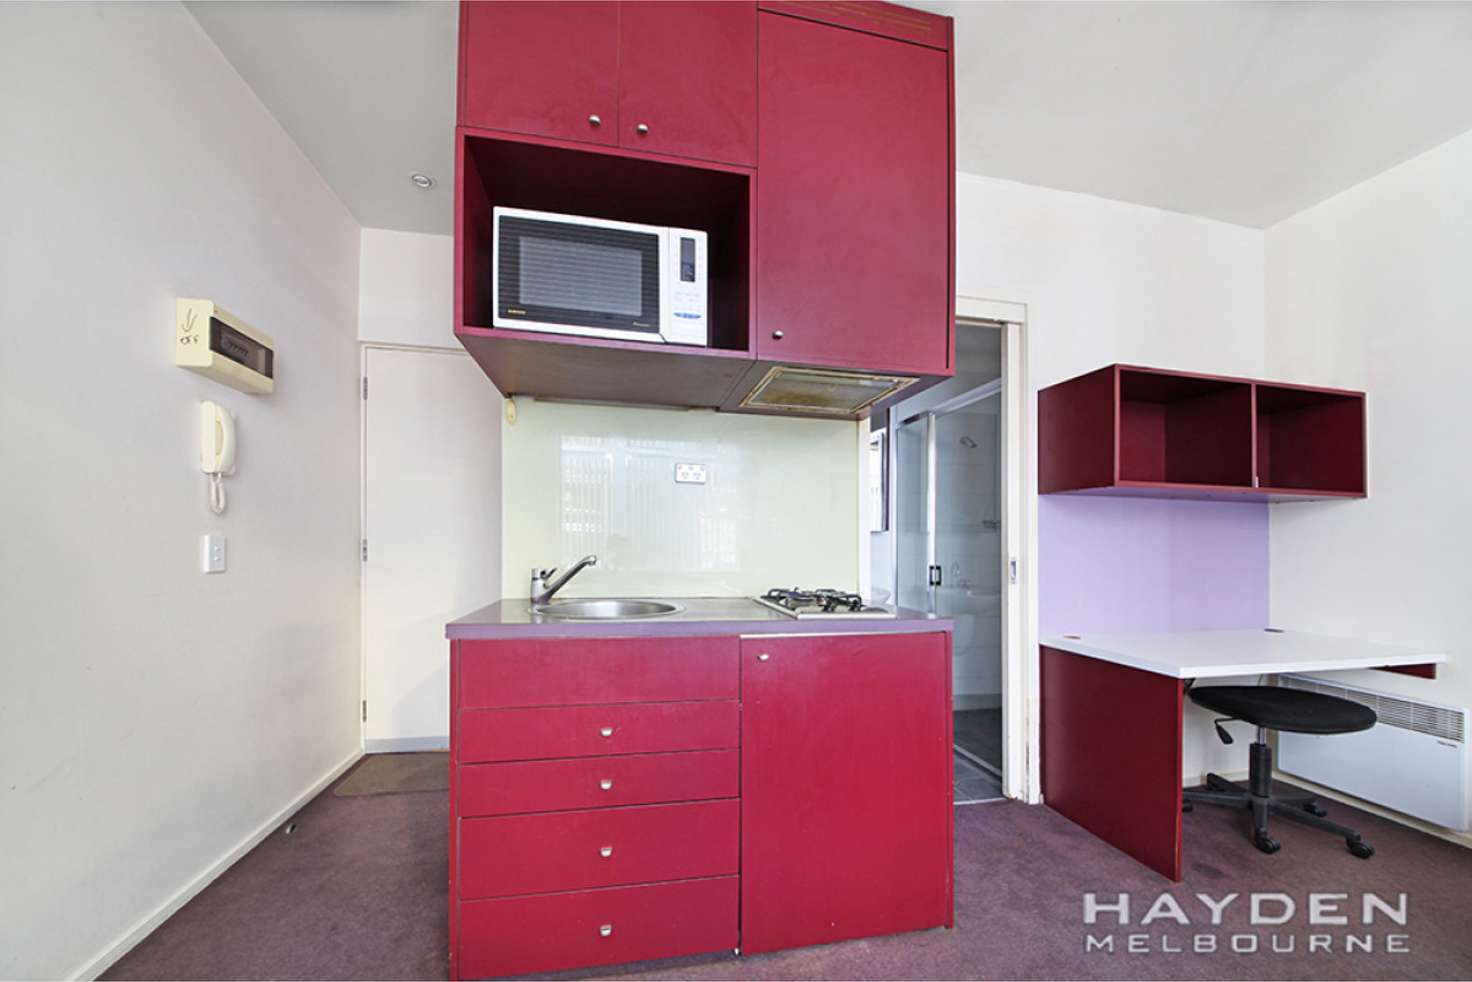 Main view of Homely studio listing, 503/62-68 Hayward Lane, Melbourne VIC 3000